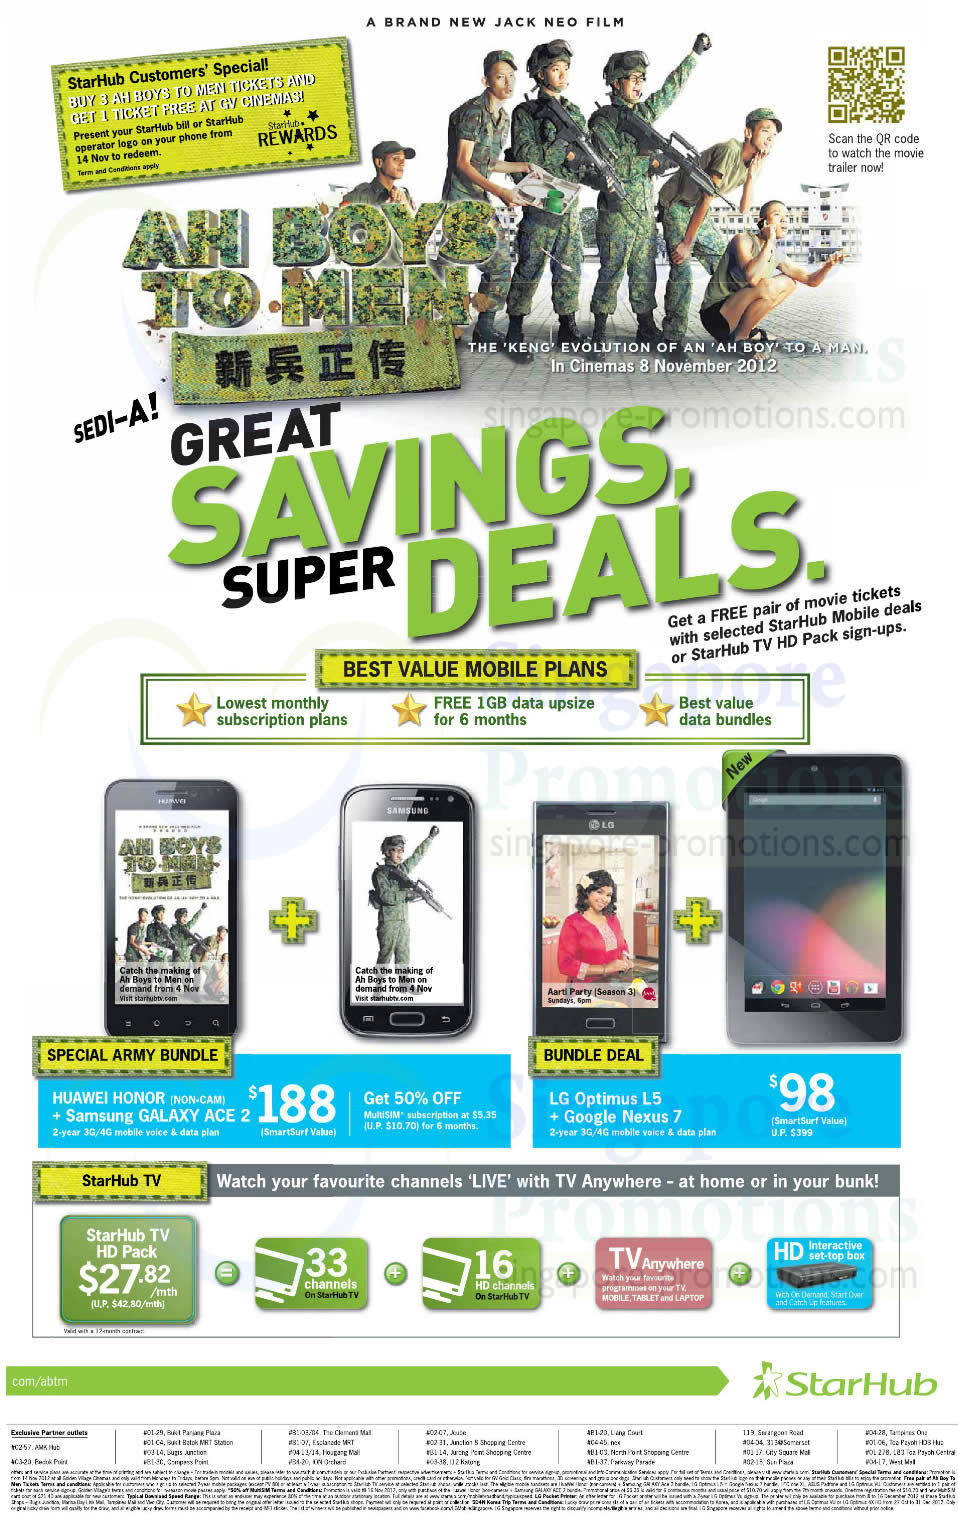 Featured image for Starhub Smartphones, Tablets, Cable TV & Mobile/Home Broadband Offers 27 Oct - 2 Nov 2012